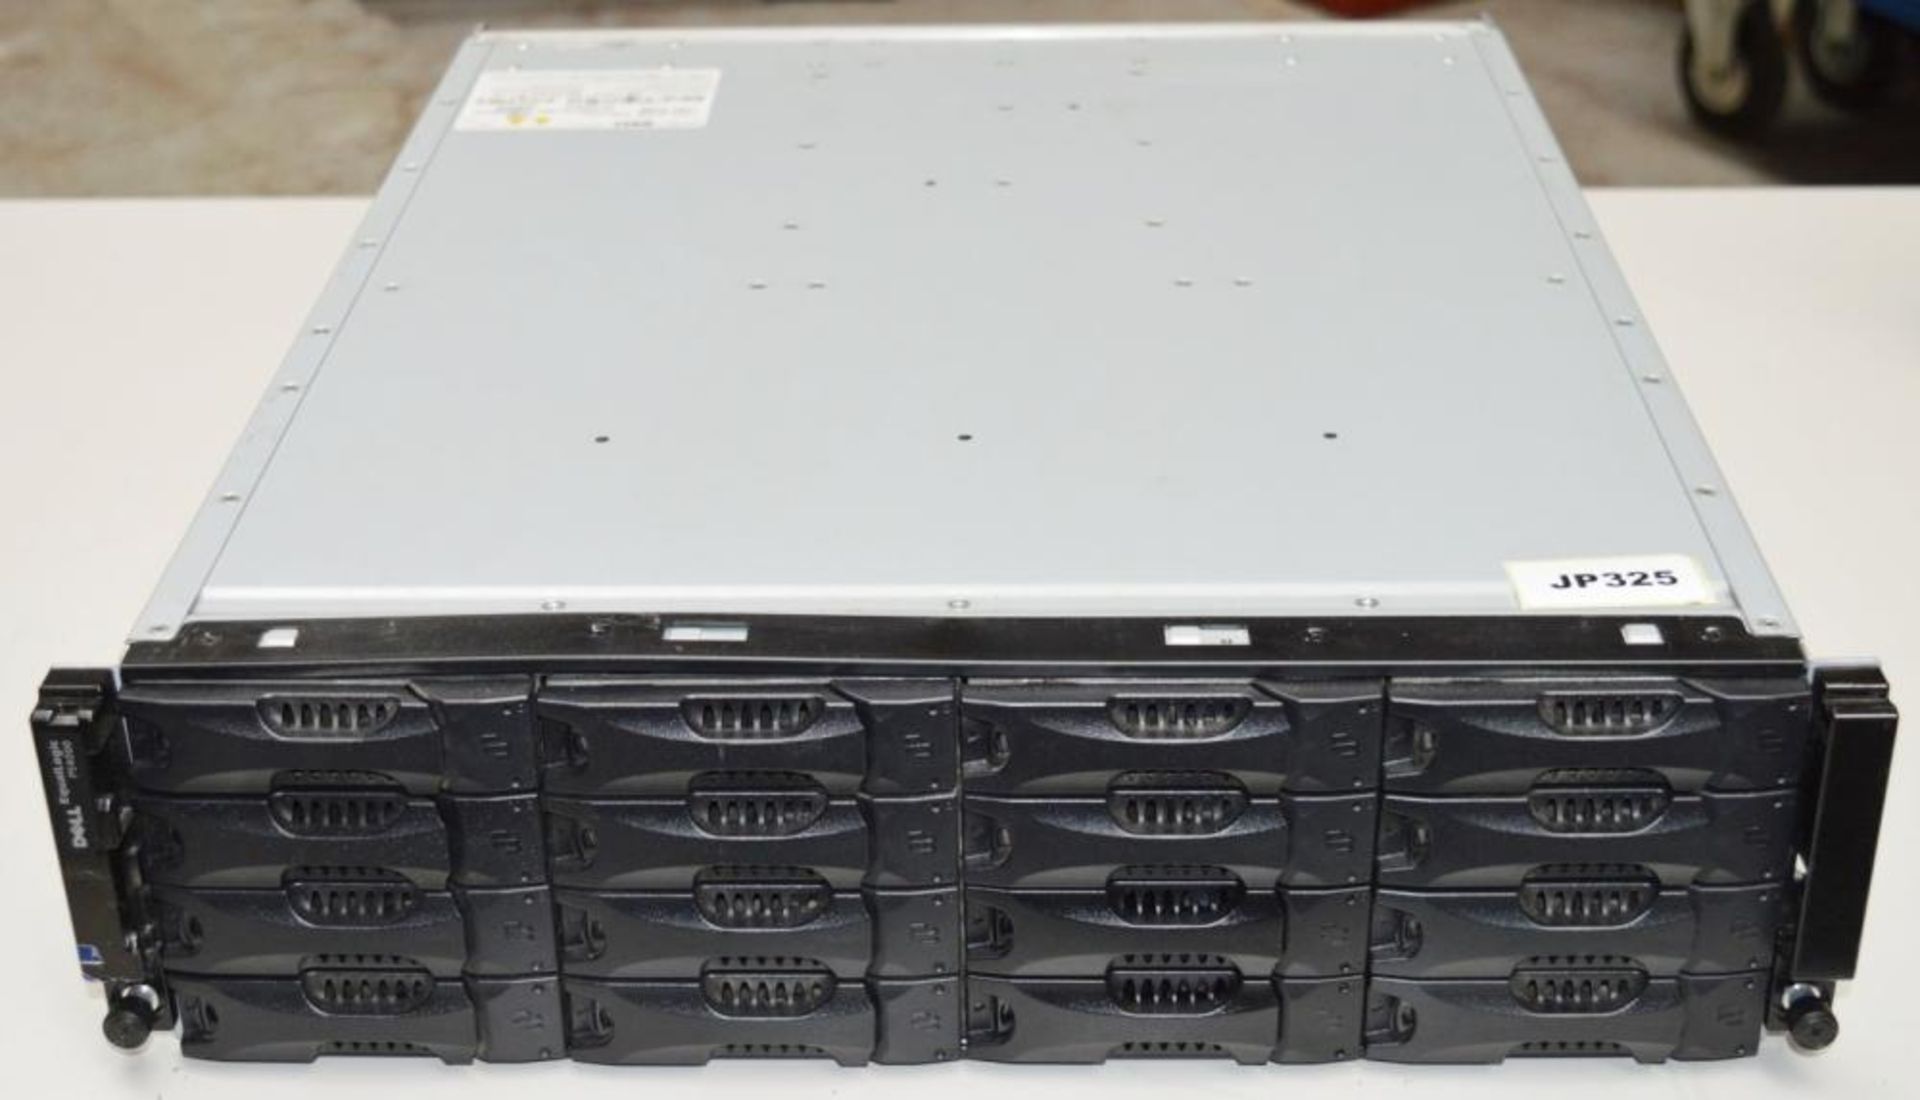 1 x Dell EqualLogic PS4000 Seires iSCSI Storage Array With Dual PSU's and 2 x EqualLogic 8 Modules - Image 3 of 7